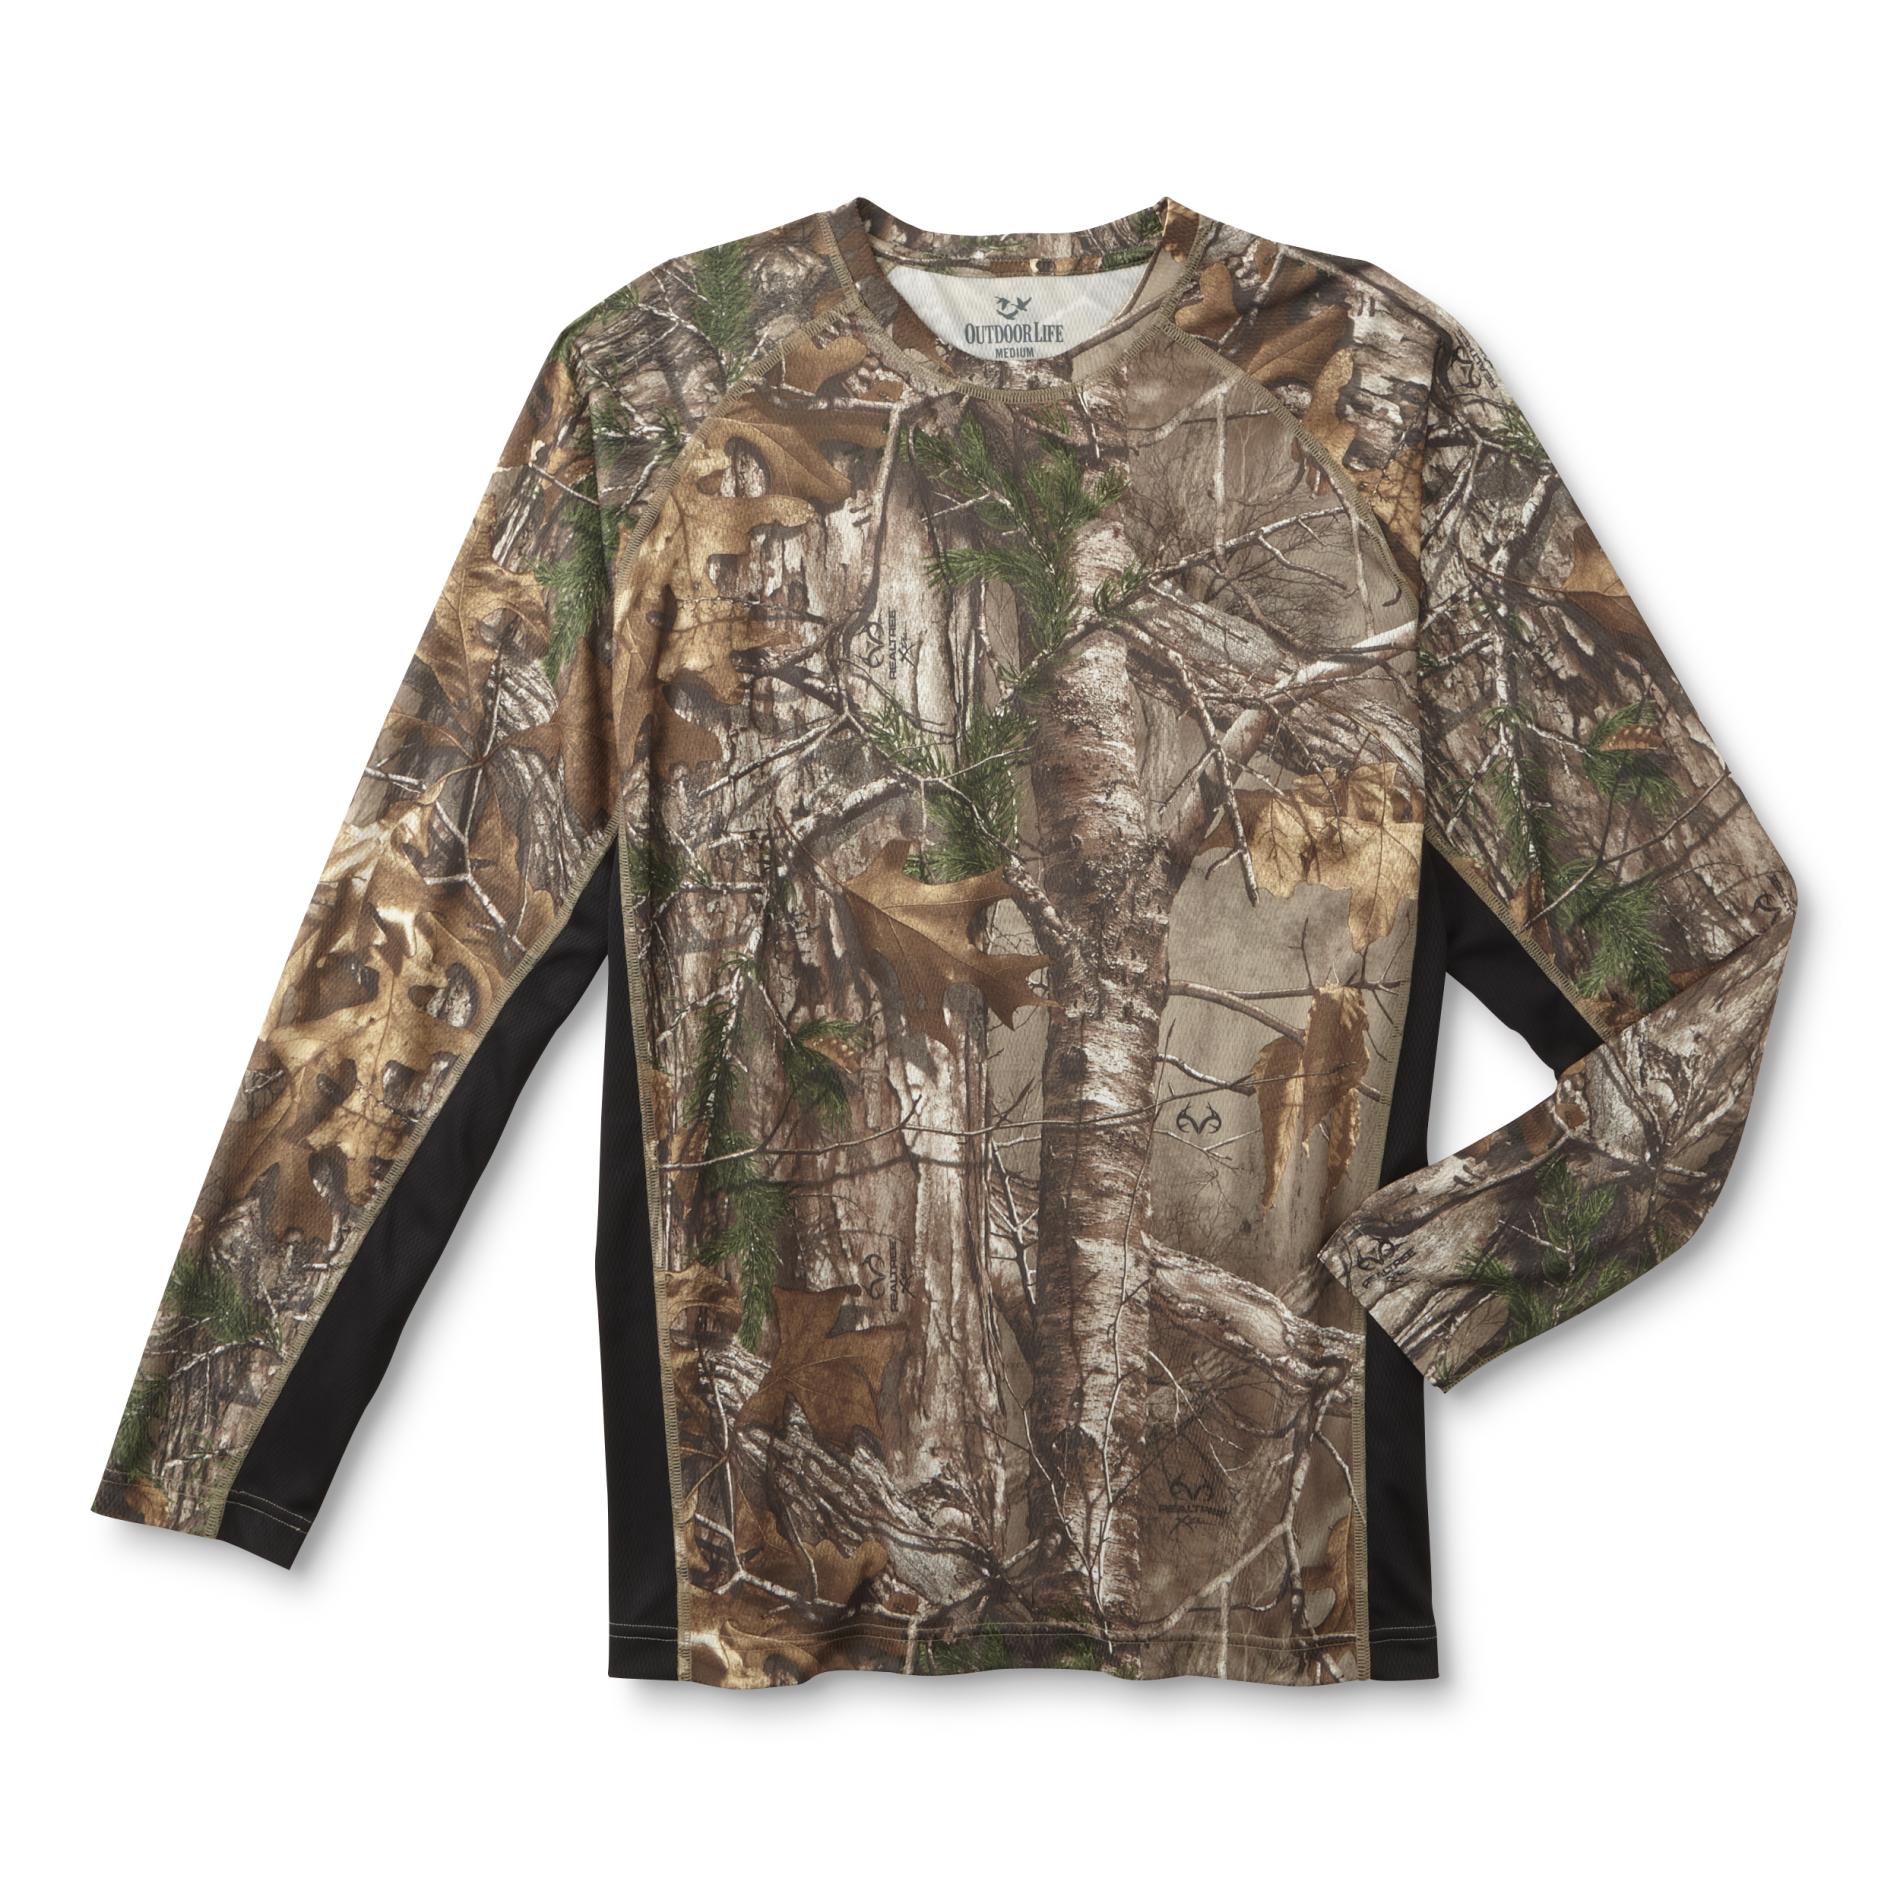 Outdoor Life Men's Performance Shirt - Camouflage